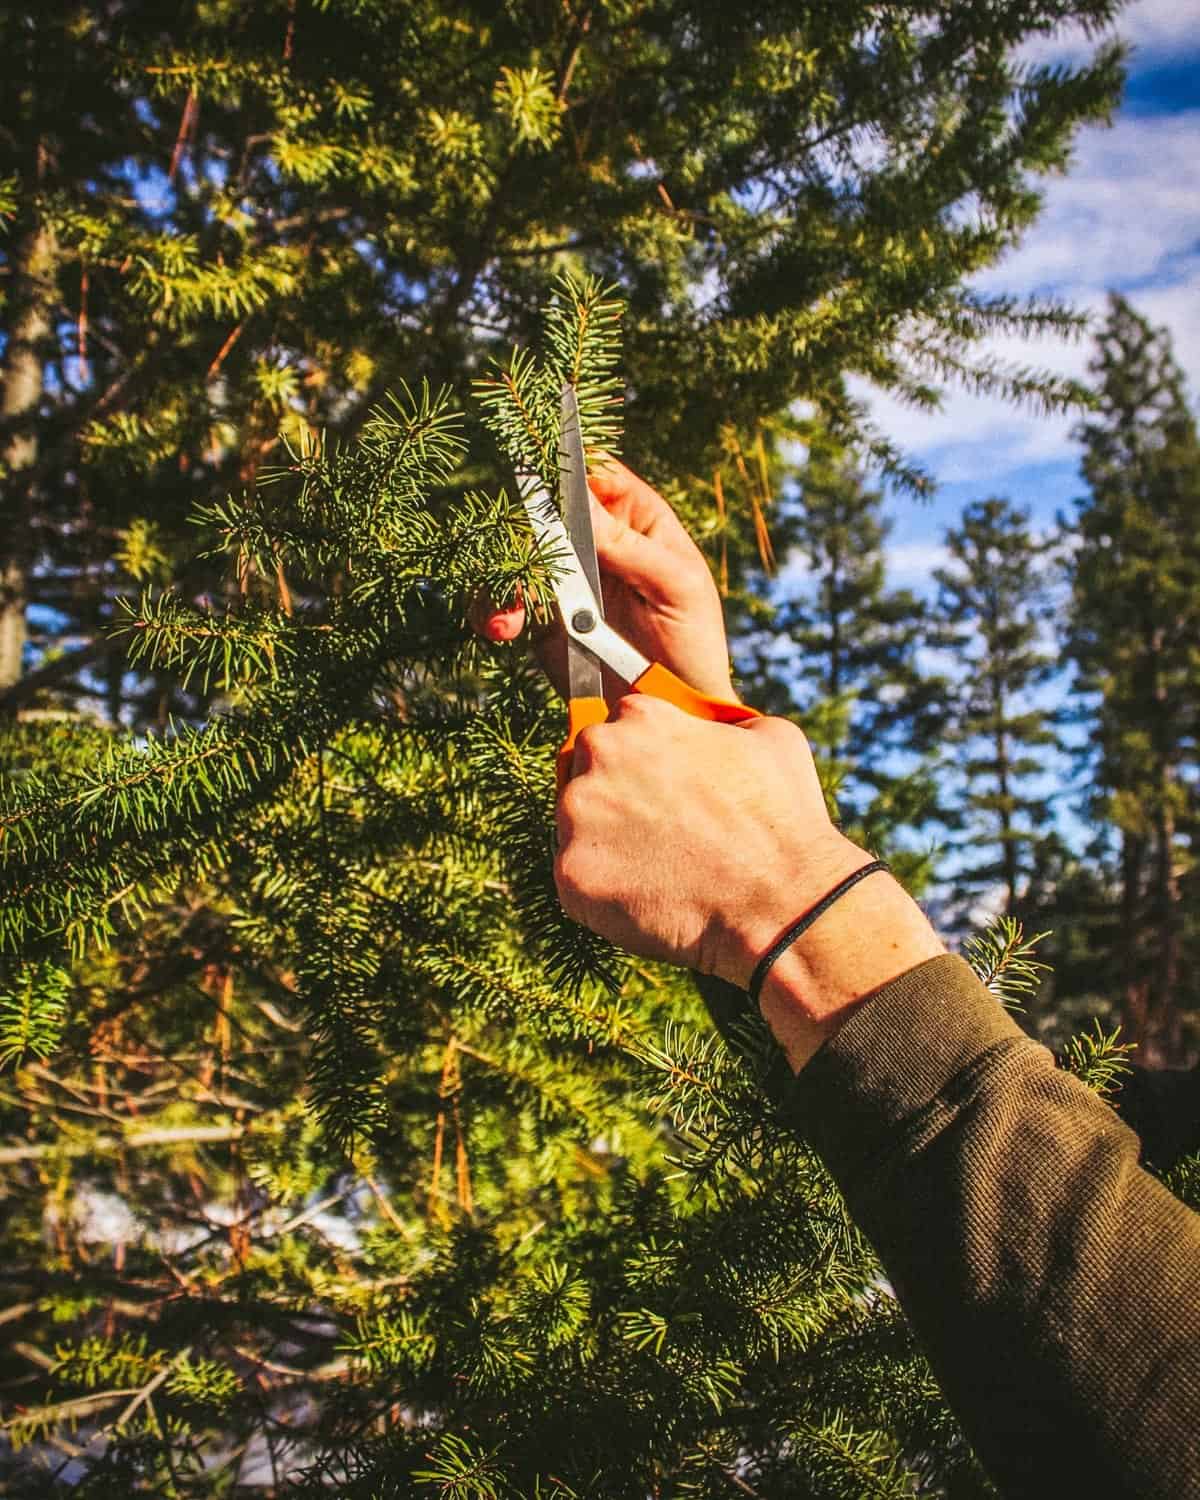 a hand harvesting conifer needles with scissors